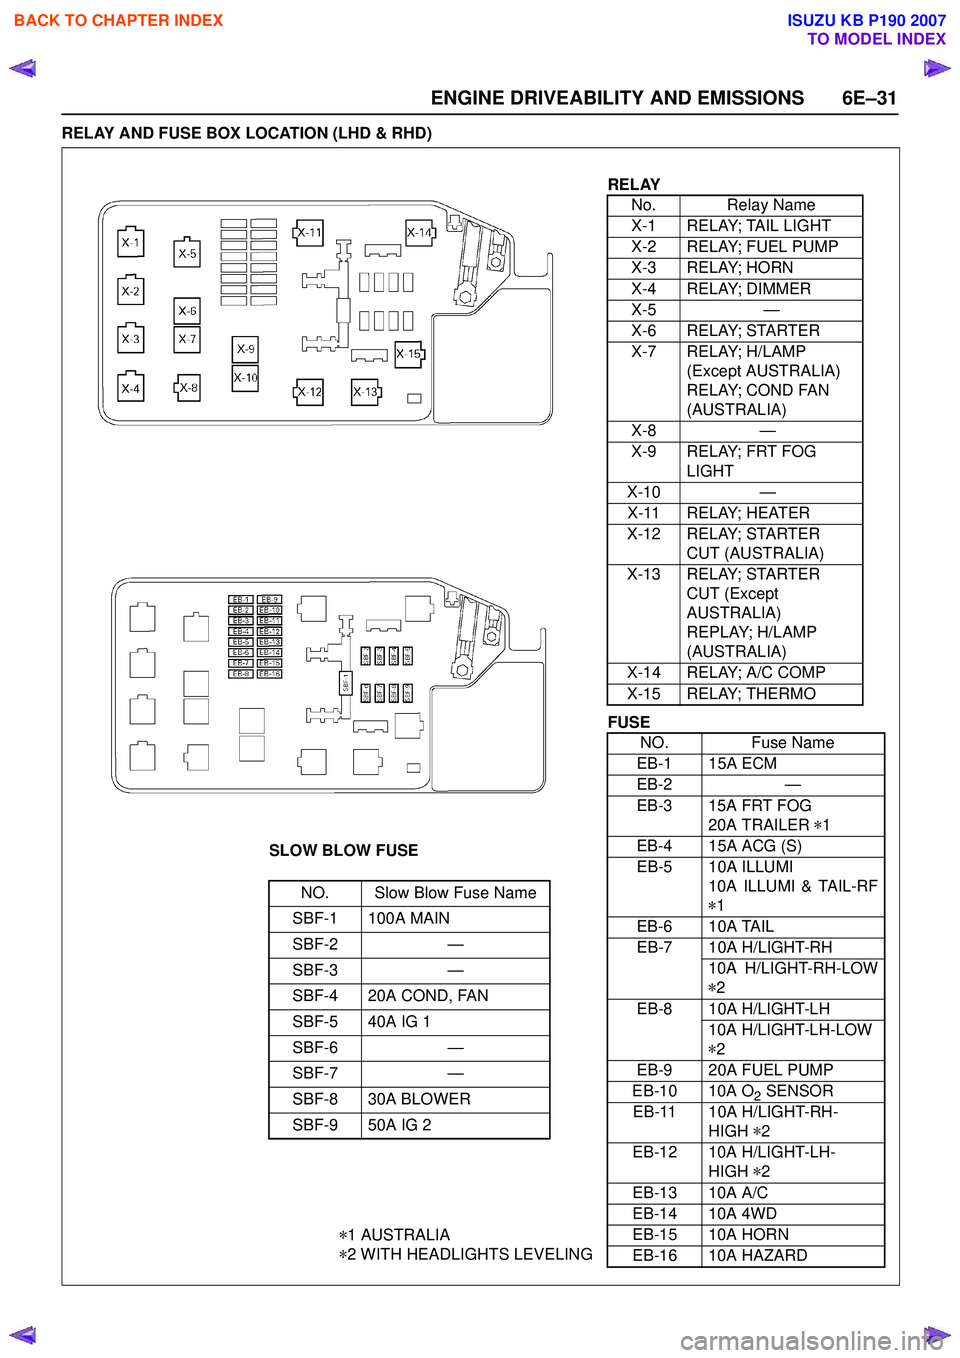 ISUZU KB P190 2007  Workshop User Guide ENGINE DRIVEABILITY AND EMISSIONS 6E–31
RELAY AND FUSE BOX LOCATION (LHD & RHD)
RELAYNo. Relay Name 
X-1 RELAY; TAIL LIGHT 
X-2 RELAY; FUEL PUMP
X-3 RELAY; HORN 
X-4 RELAY; DIMMER 
X-5 —
X-6 RELAY